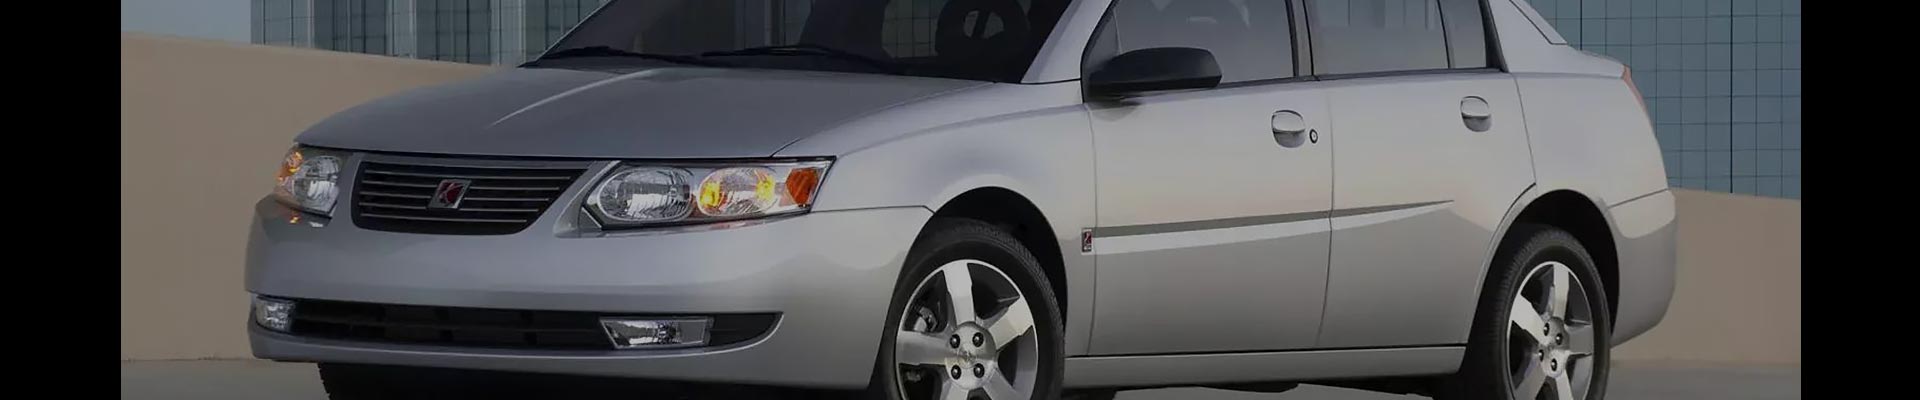 Shop Replacement and OEM 2005 Saturn Ion Parts with Discounted Price on the Net